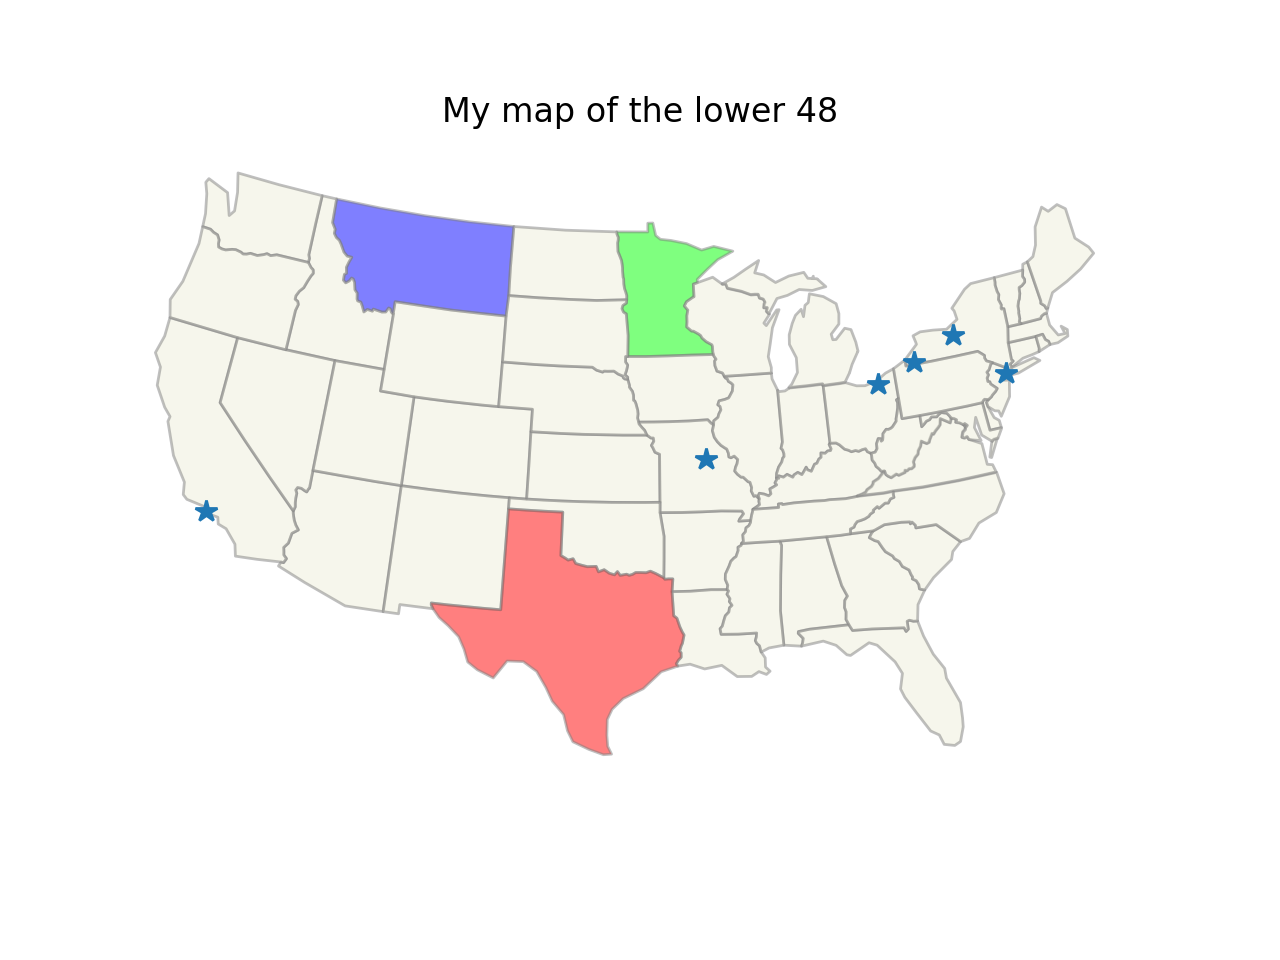 My map of the lower 48